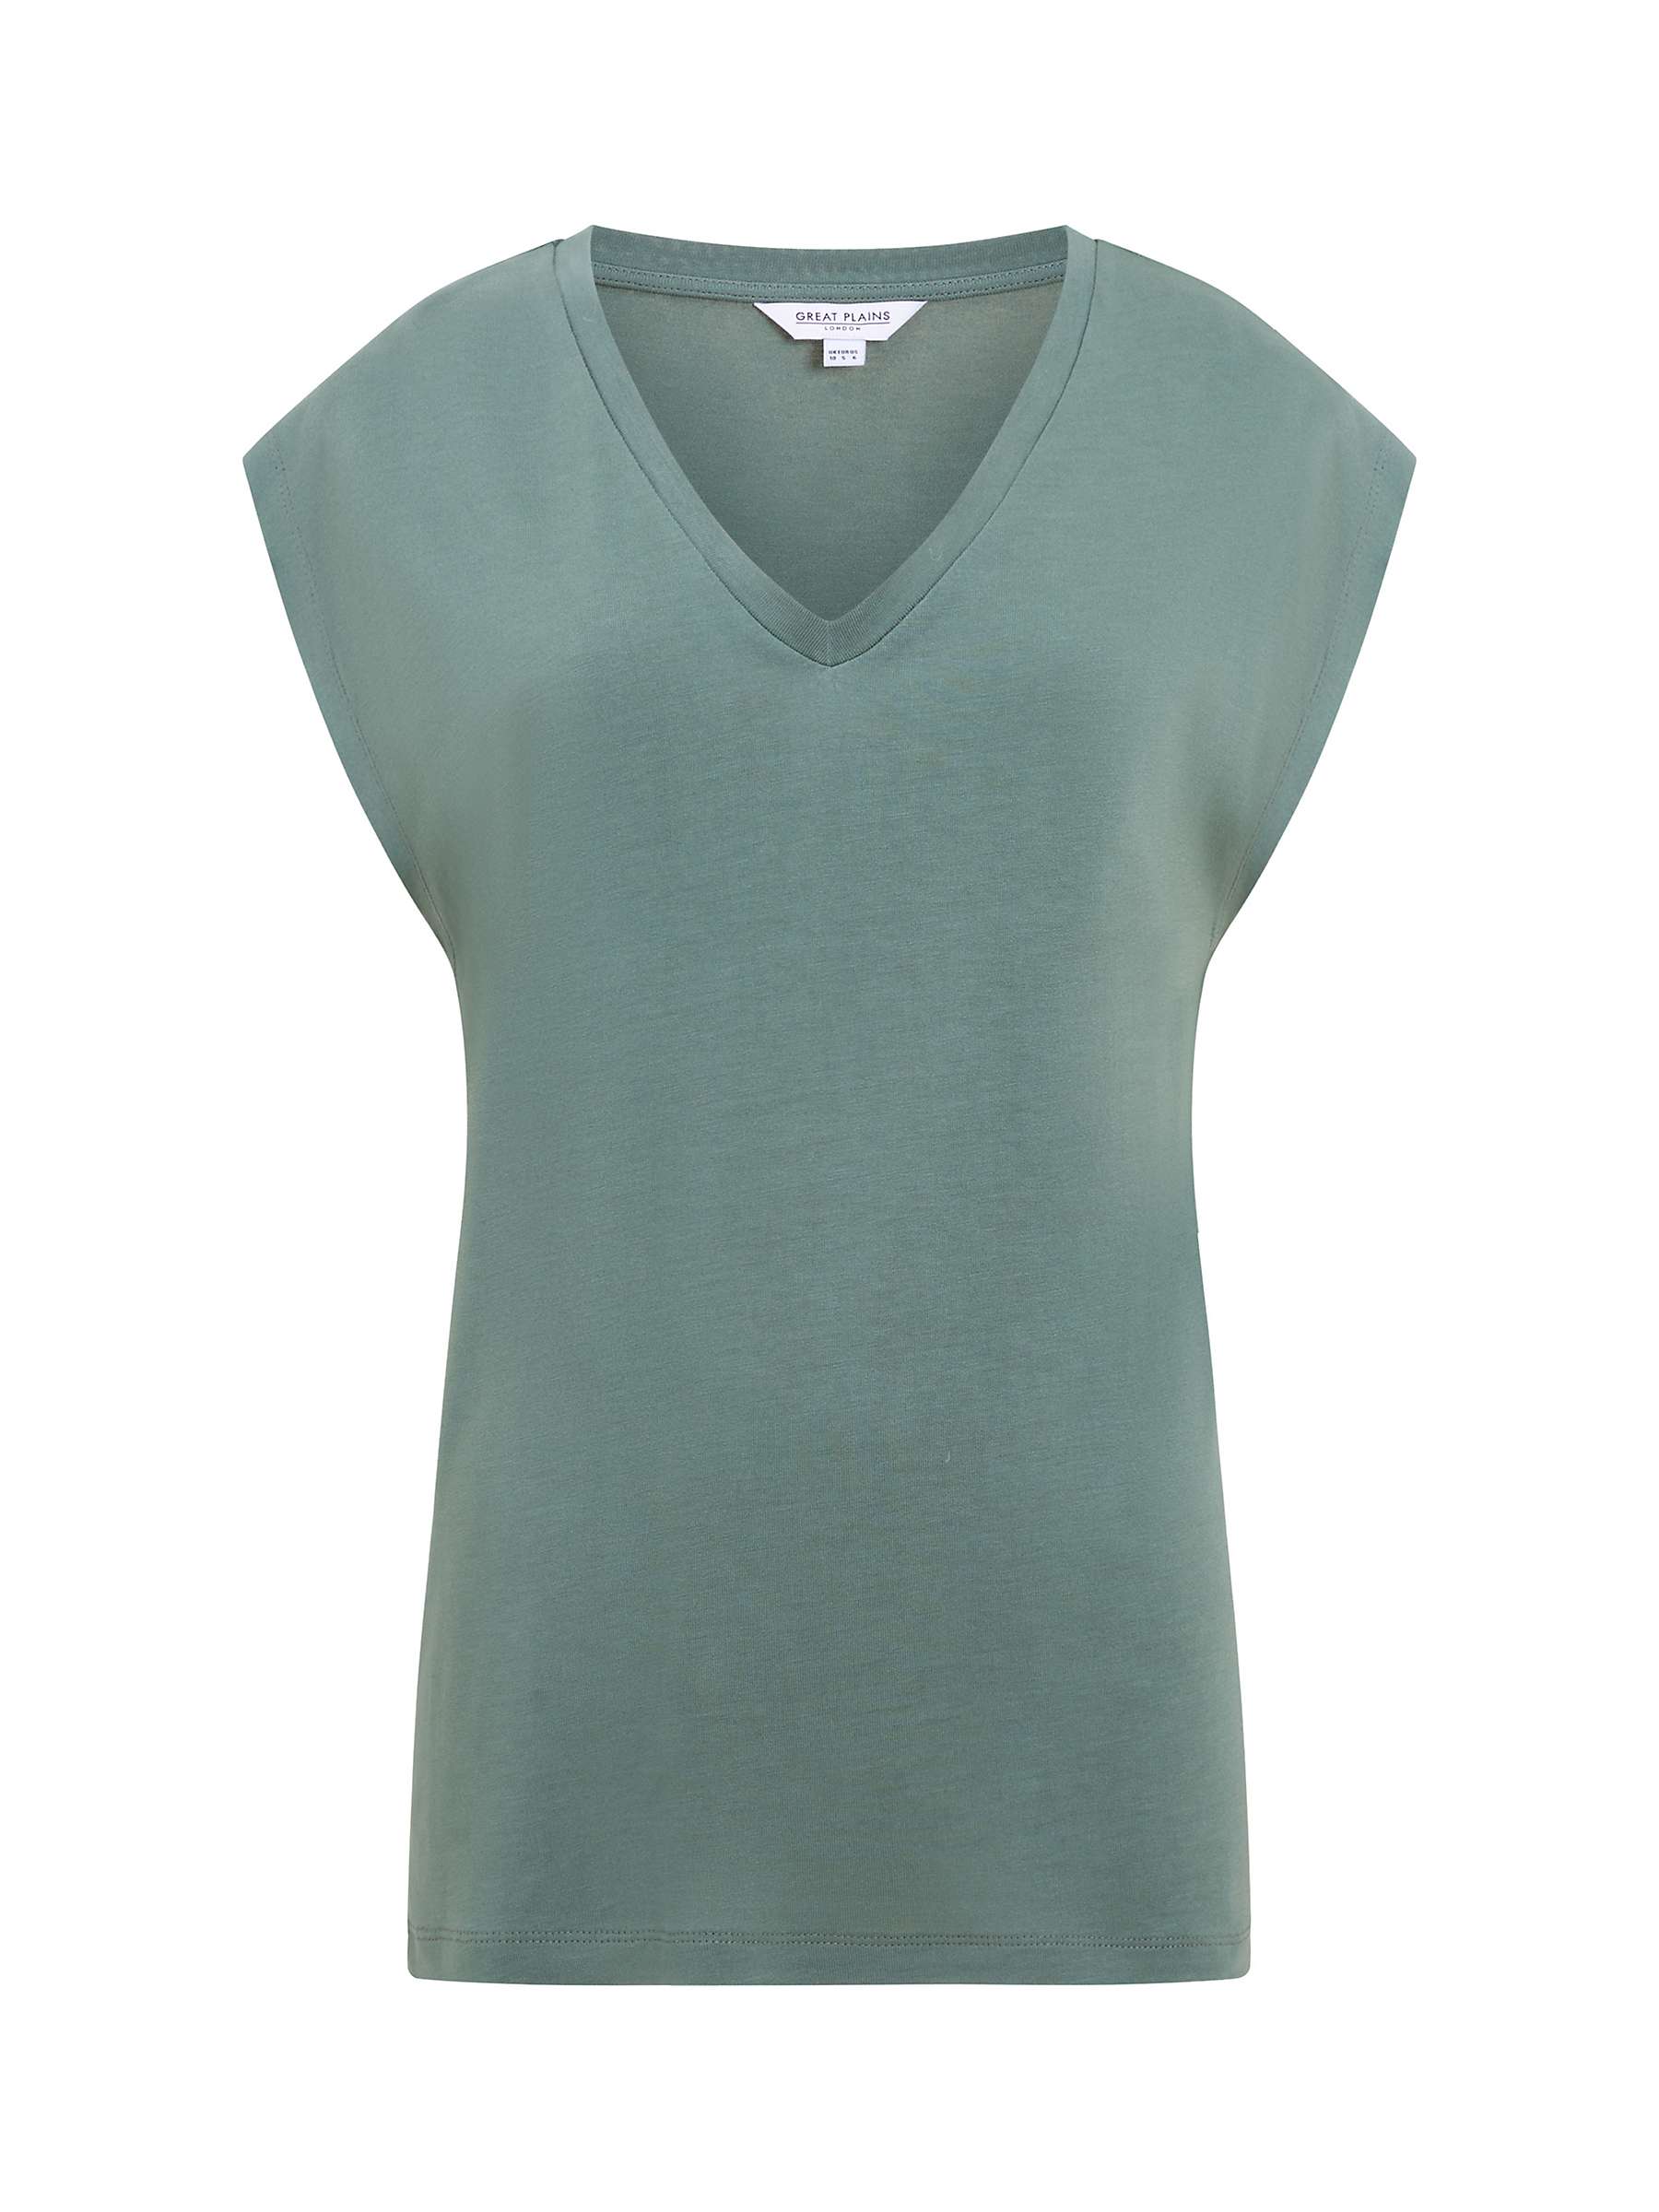 Buy Great Plains Soft Touch Jersey V-Neck Top Online at johnlewis.com